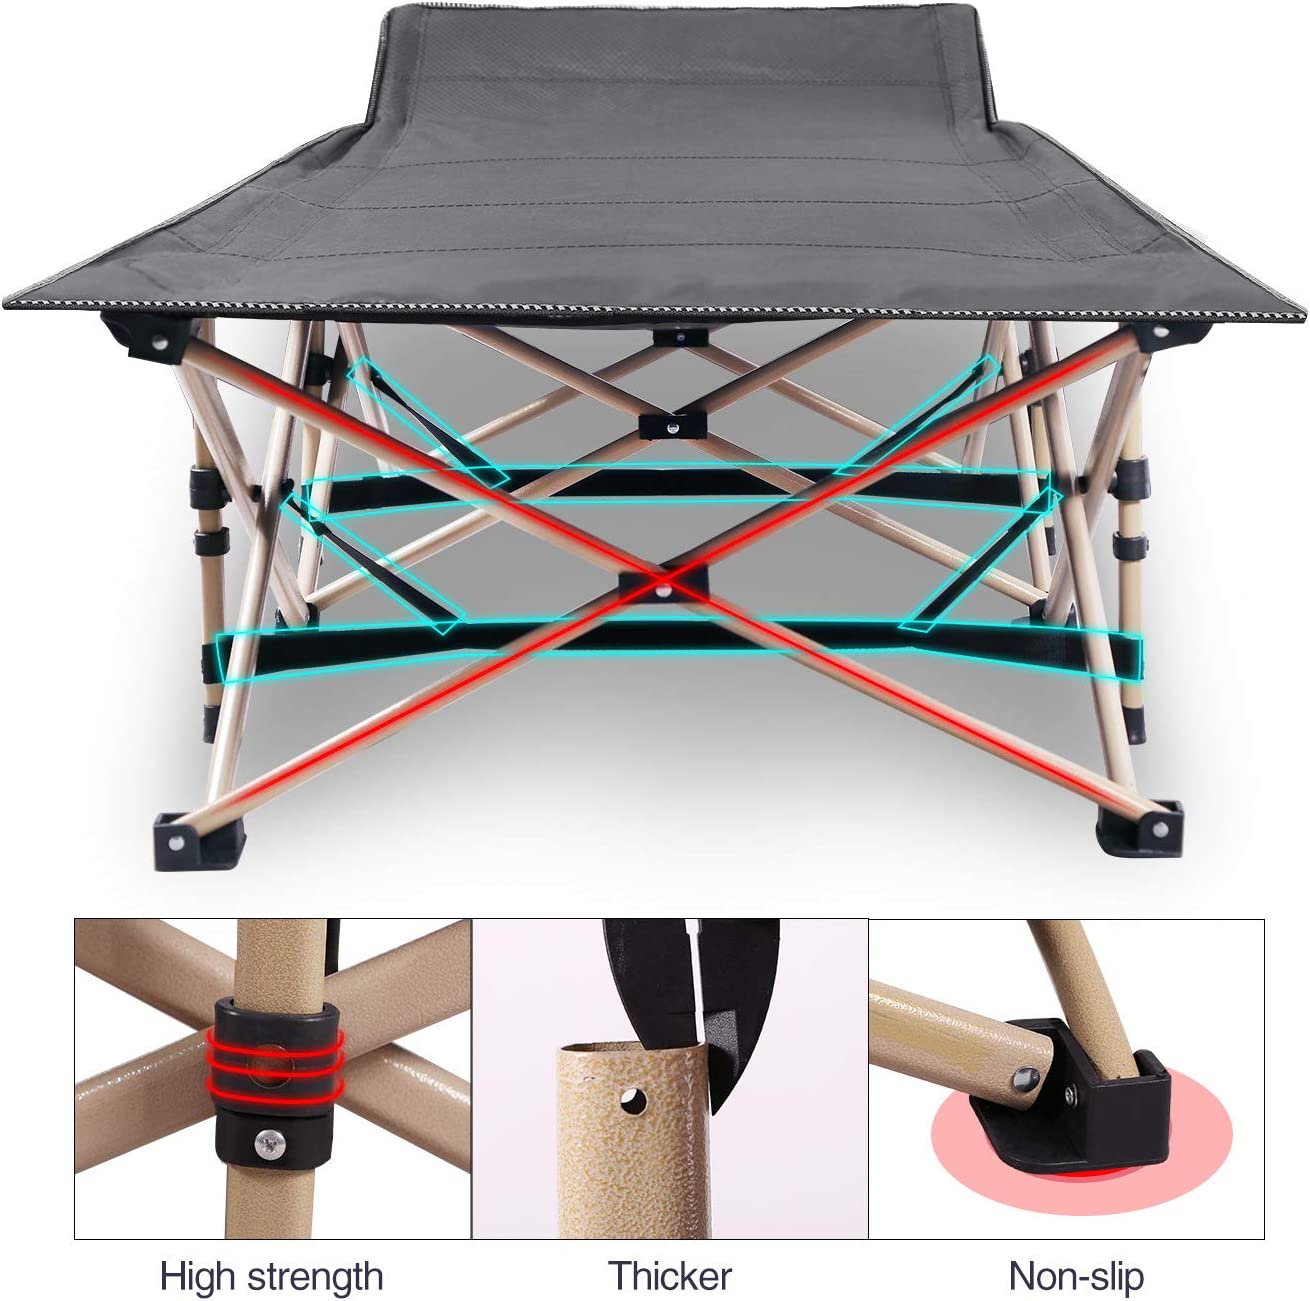 Folding Camping Bed